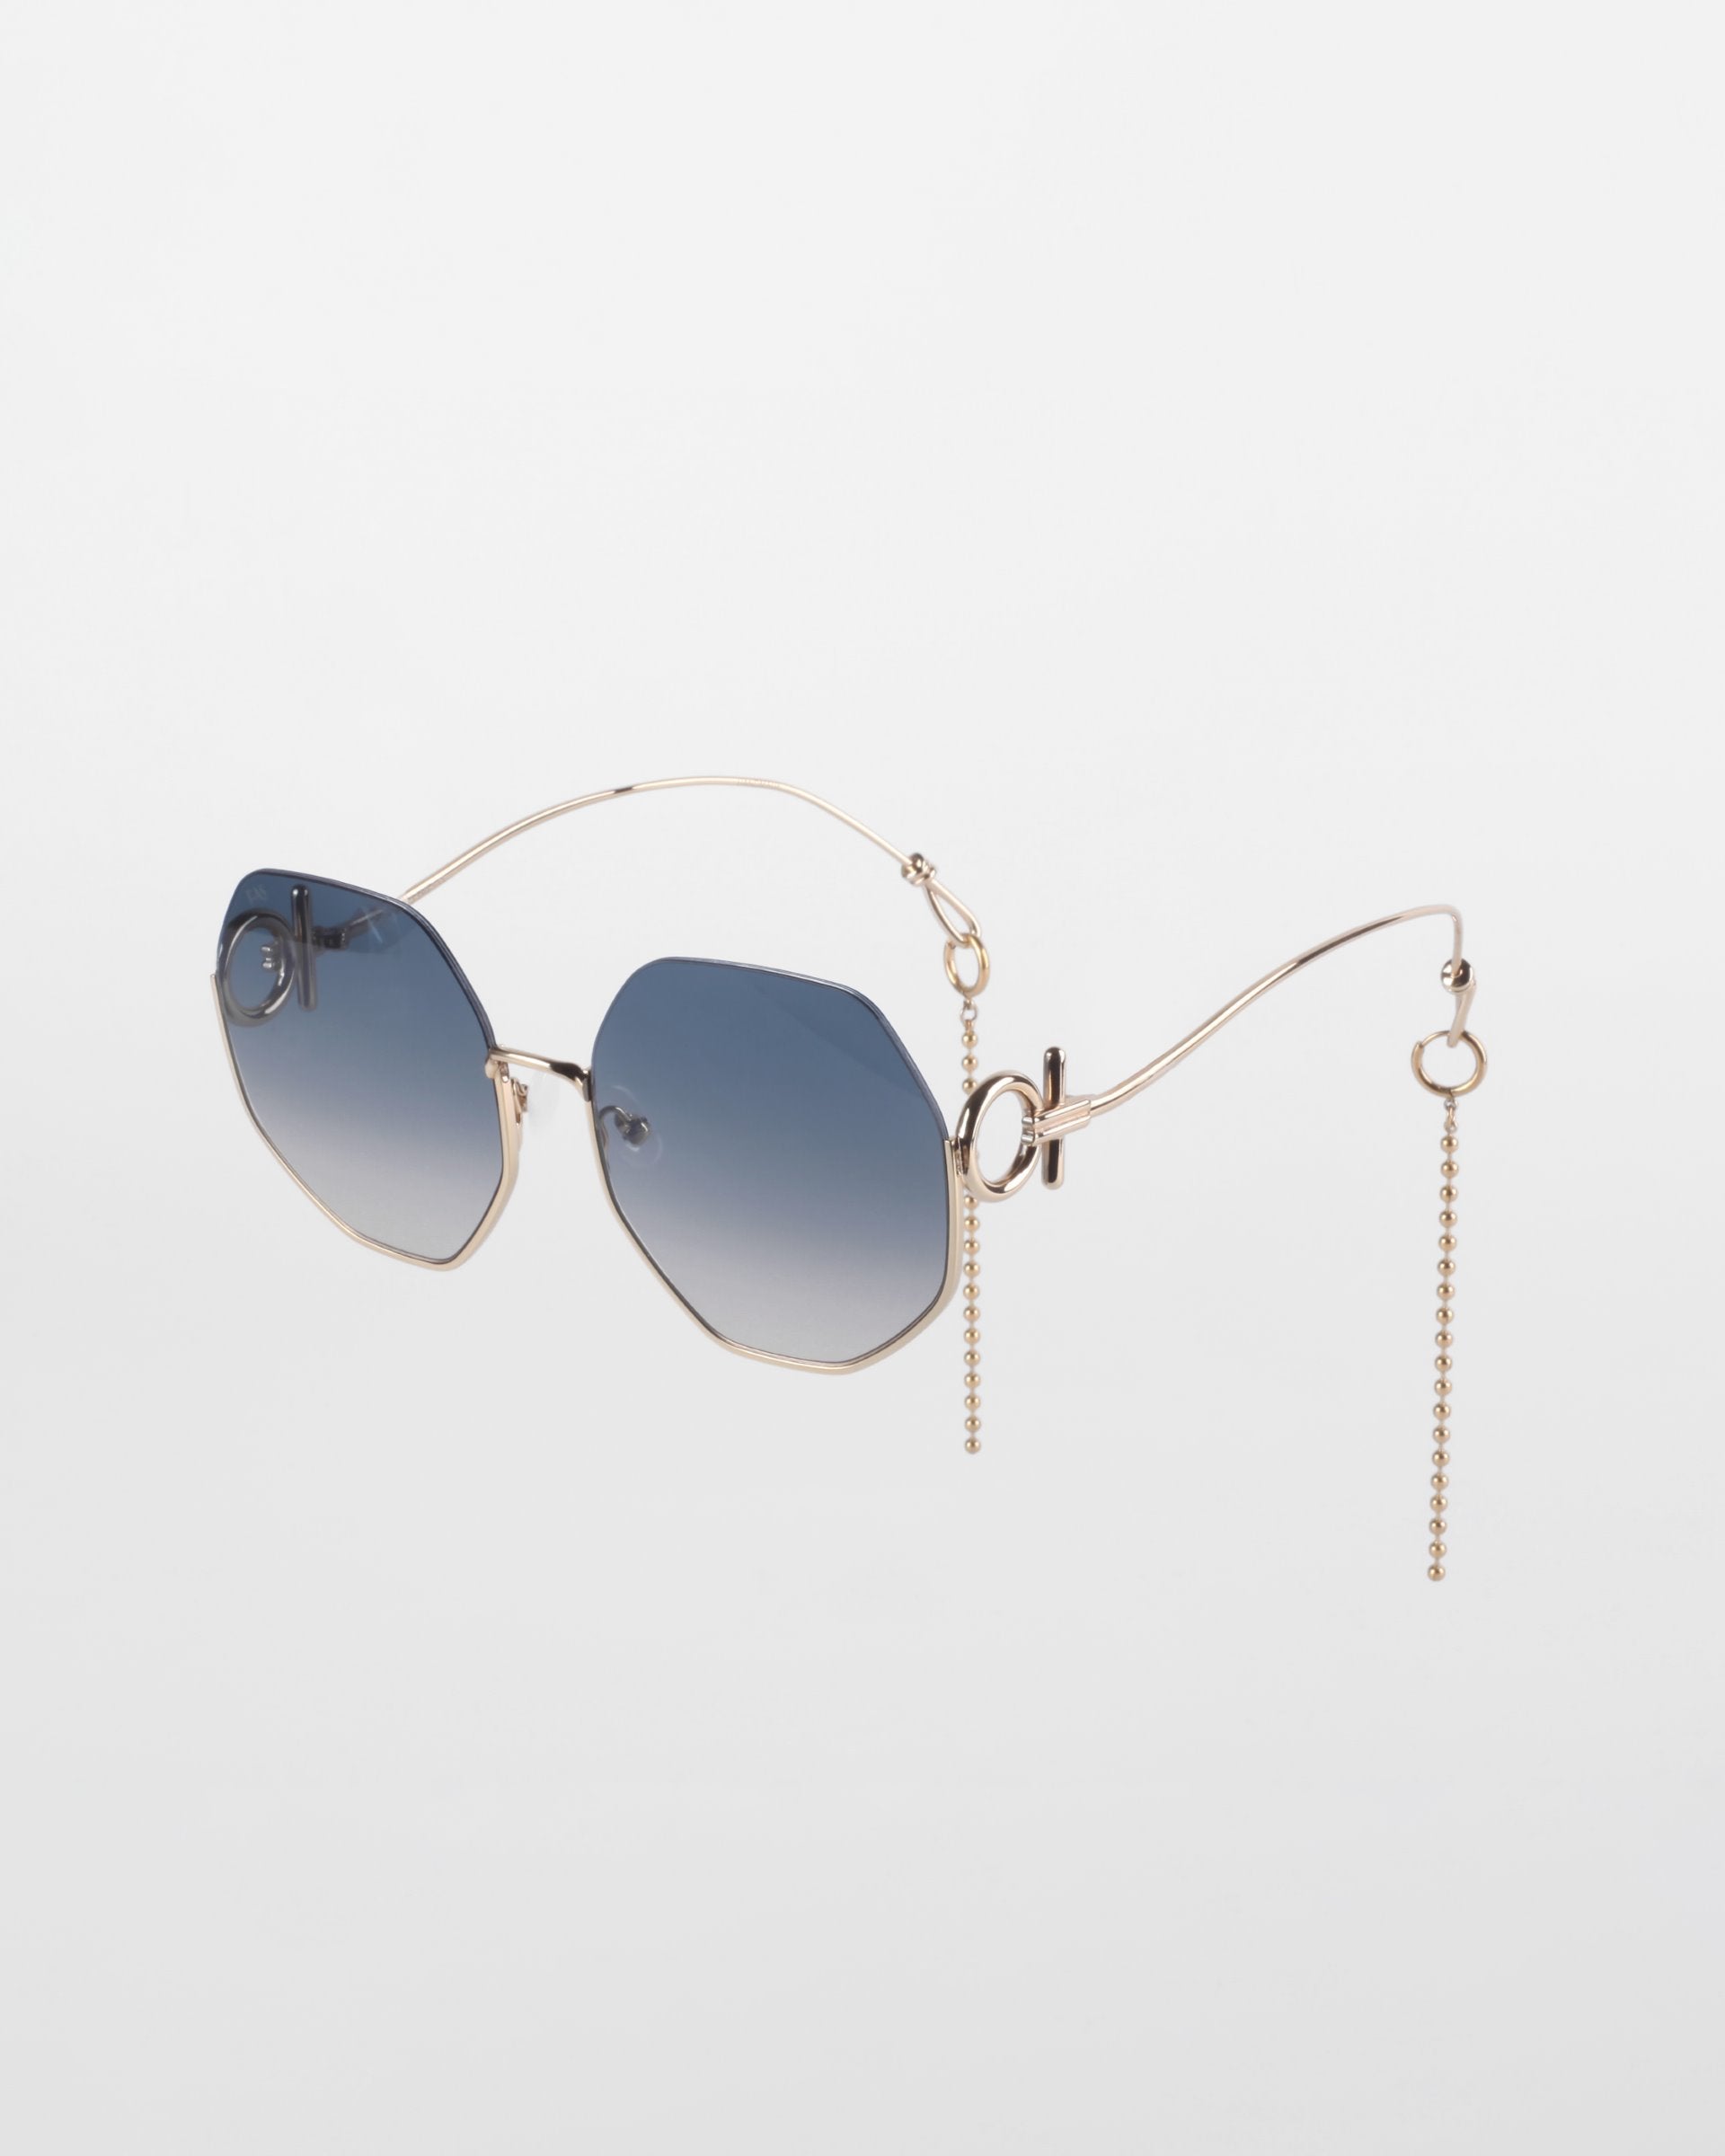 A pair of limited-edition fashionable Palace sunglasses by For Art&#39;s Sake® with blue gradient lenses and geometric, 18-karat gold-plated frames. The unique wireframe arms feature decorative chains hanging from the ends, adding an avant-garde touch to the design. These UVA &amp; UVB-protected Palace sunglasses are set against a plain white background.